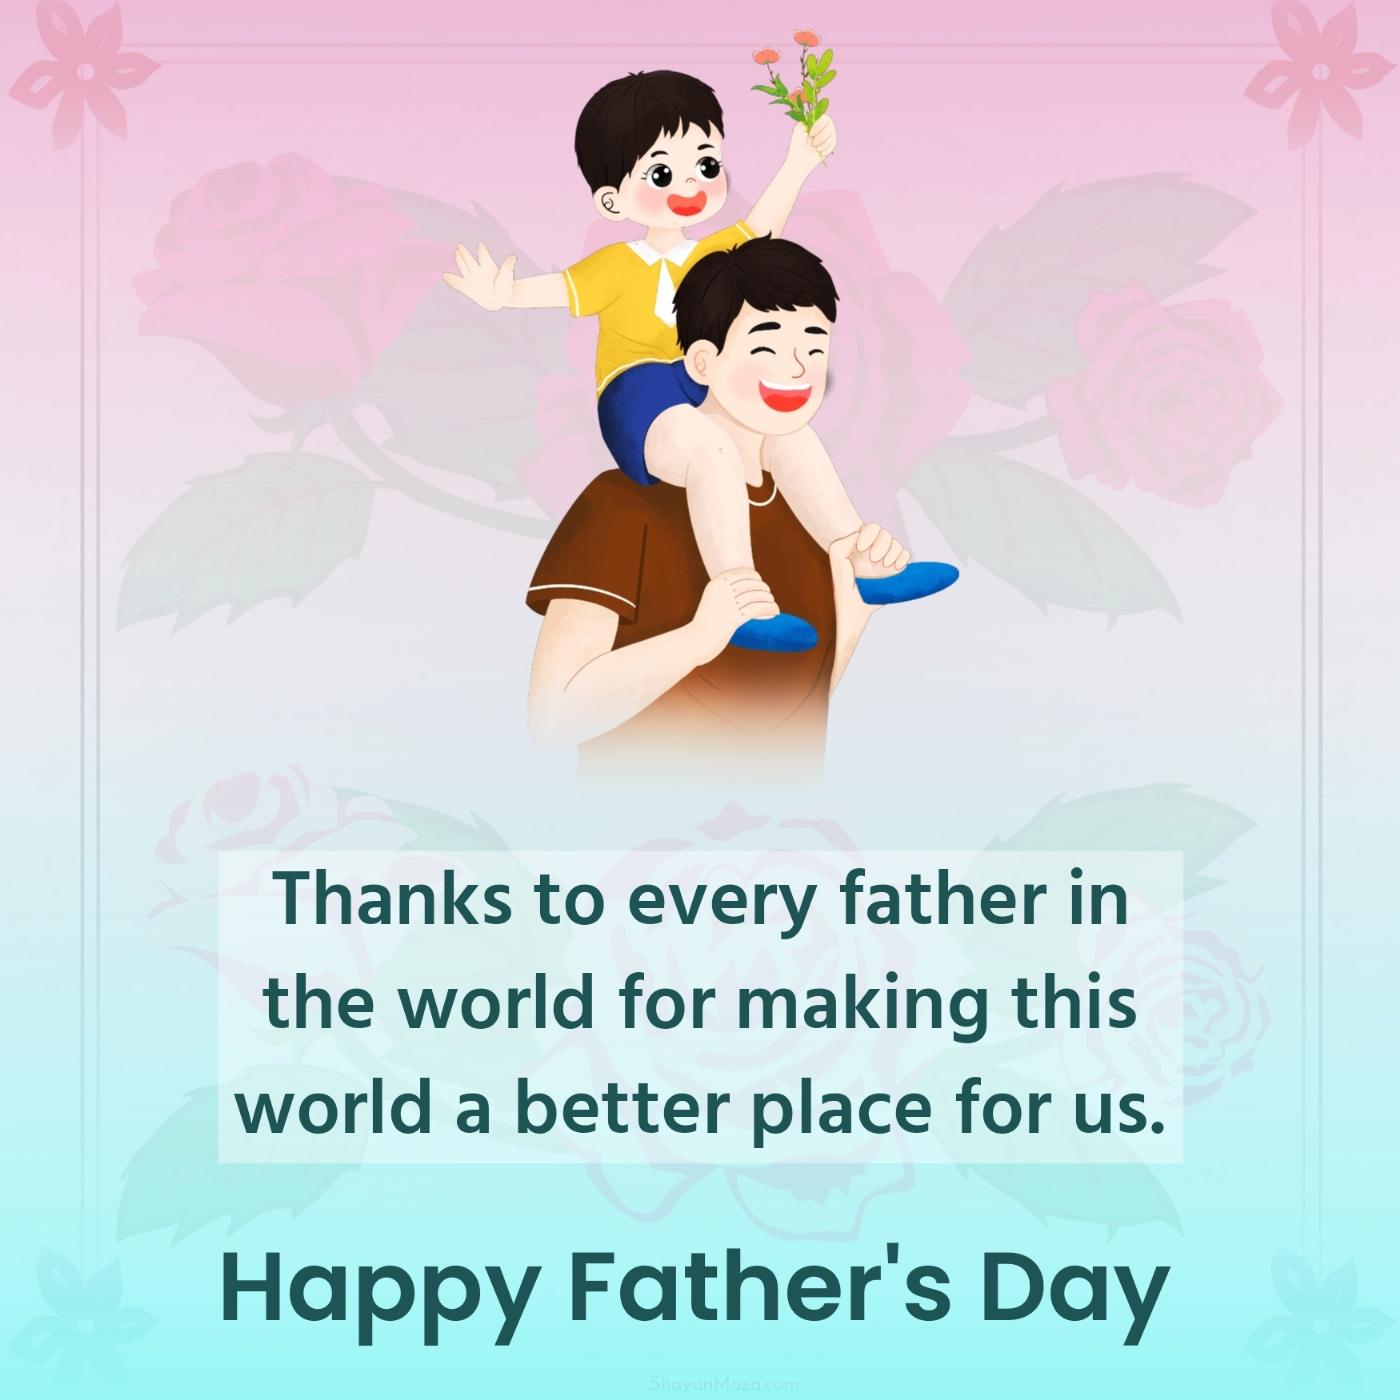 Thanks to every father in the world for making this world